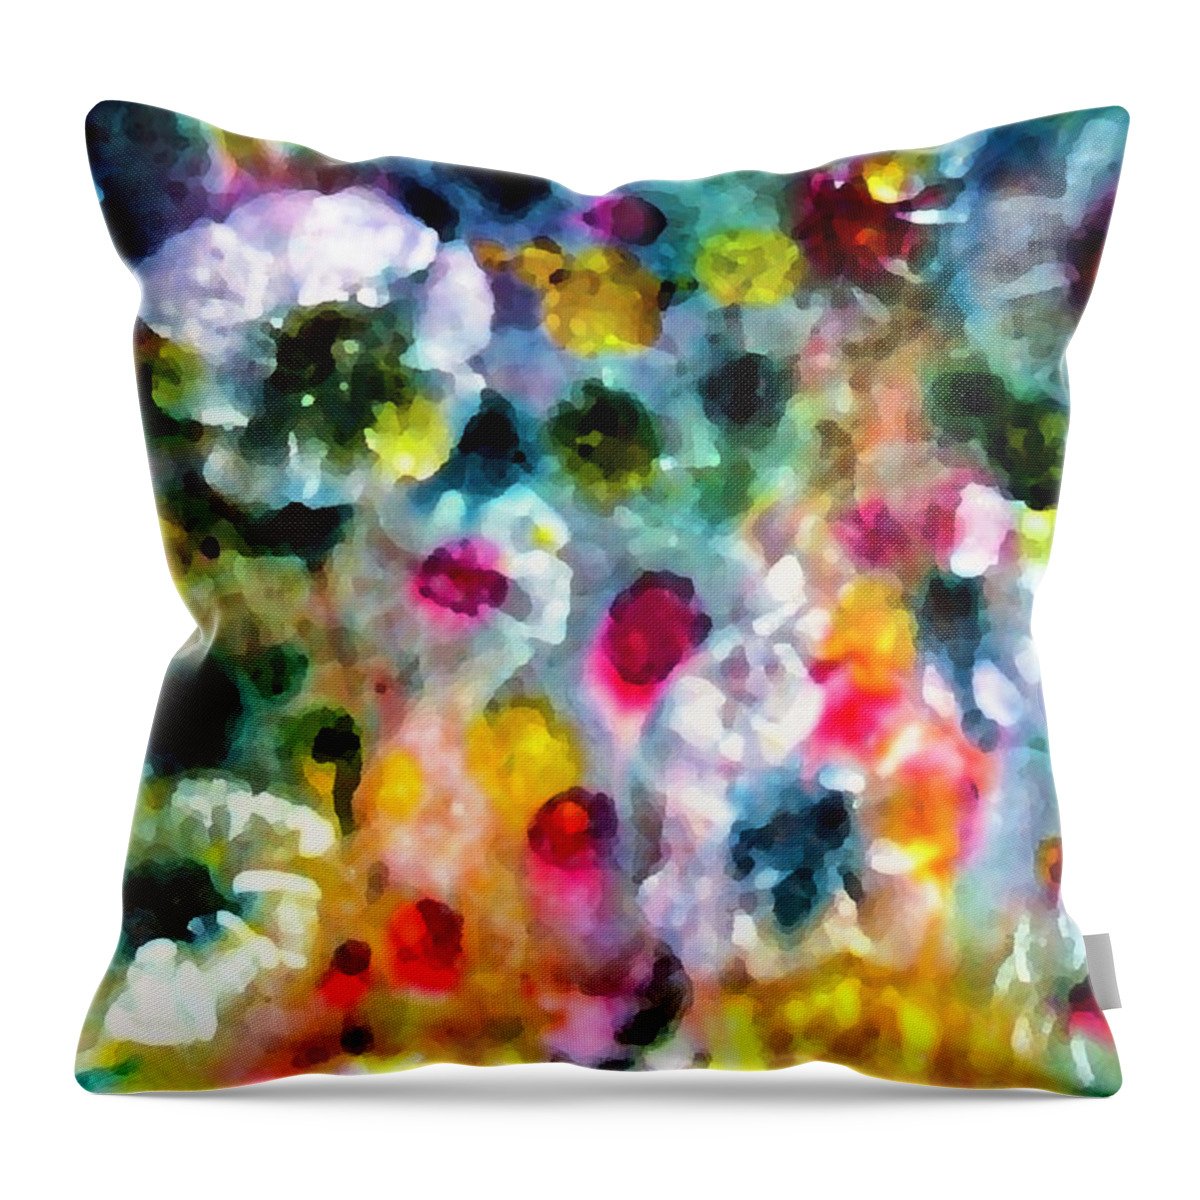 Flowers Throw Pillow featuring the digital art Full Bloom by Don Wright